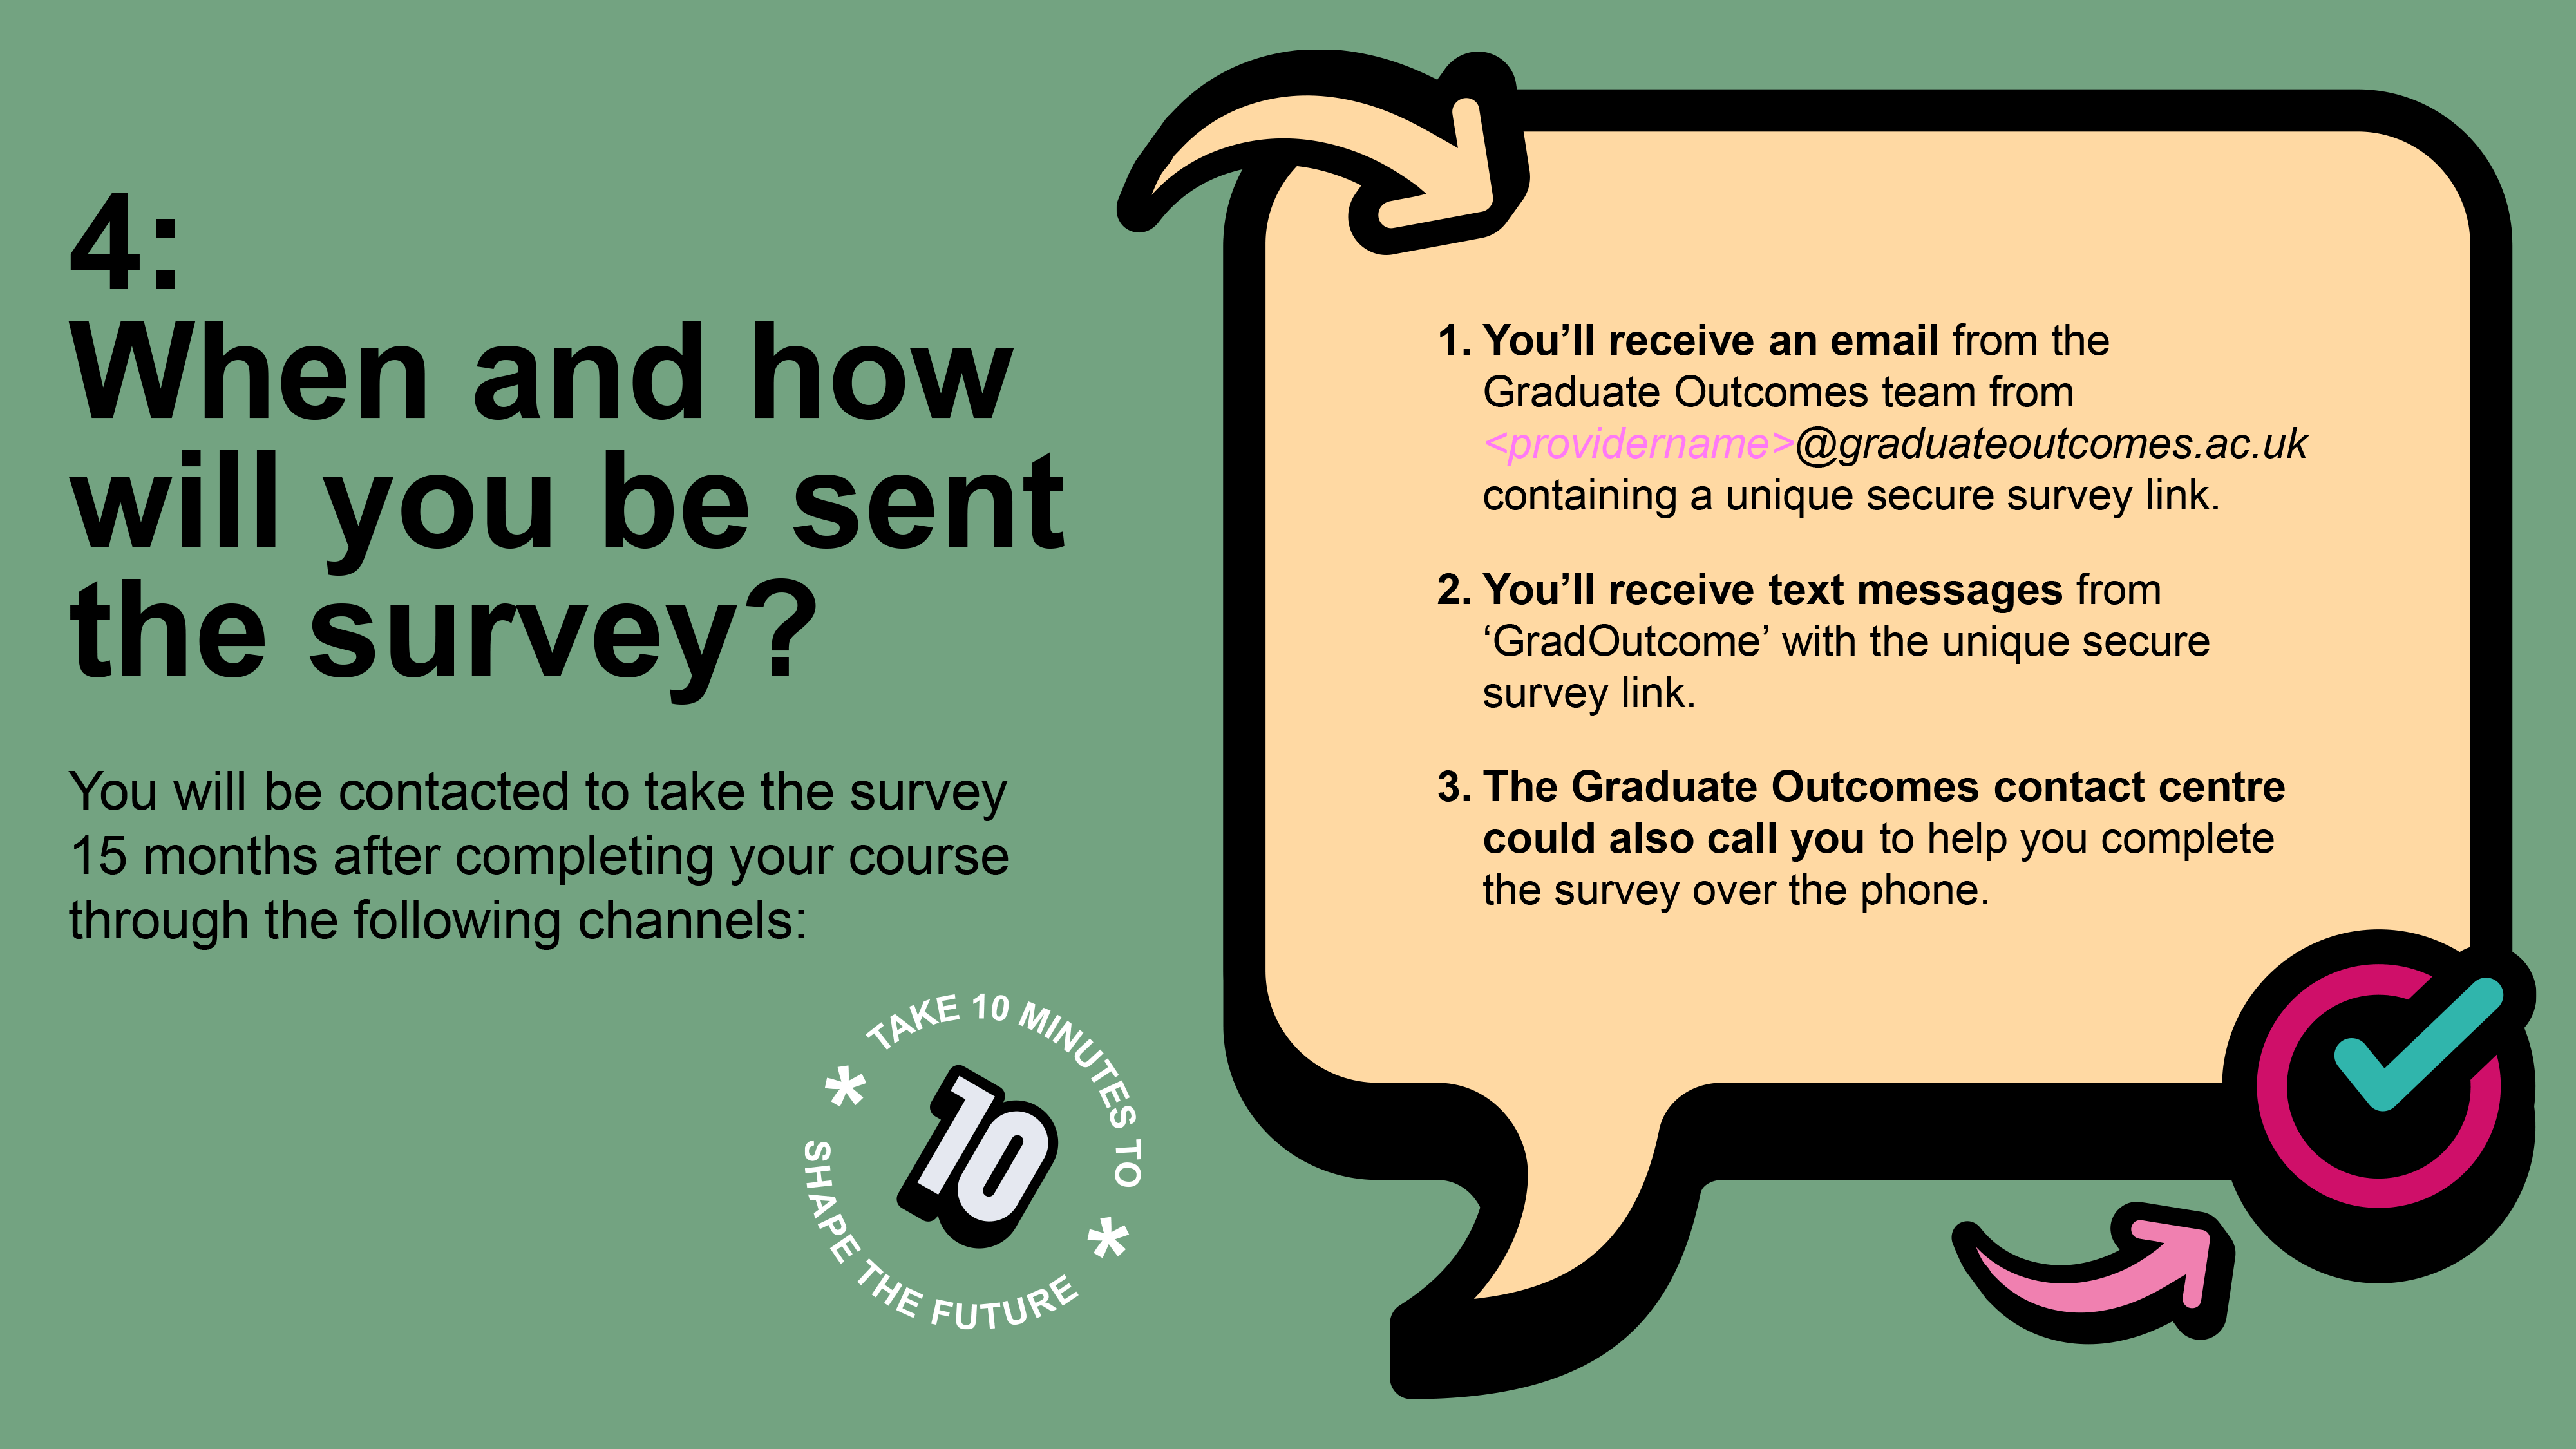 When and how will you be sent the survey?